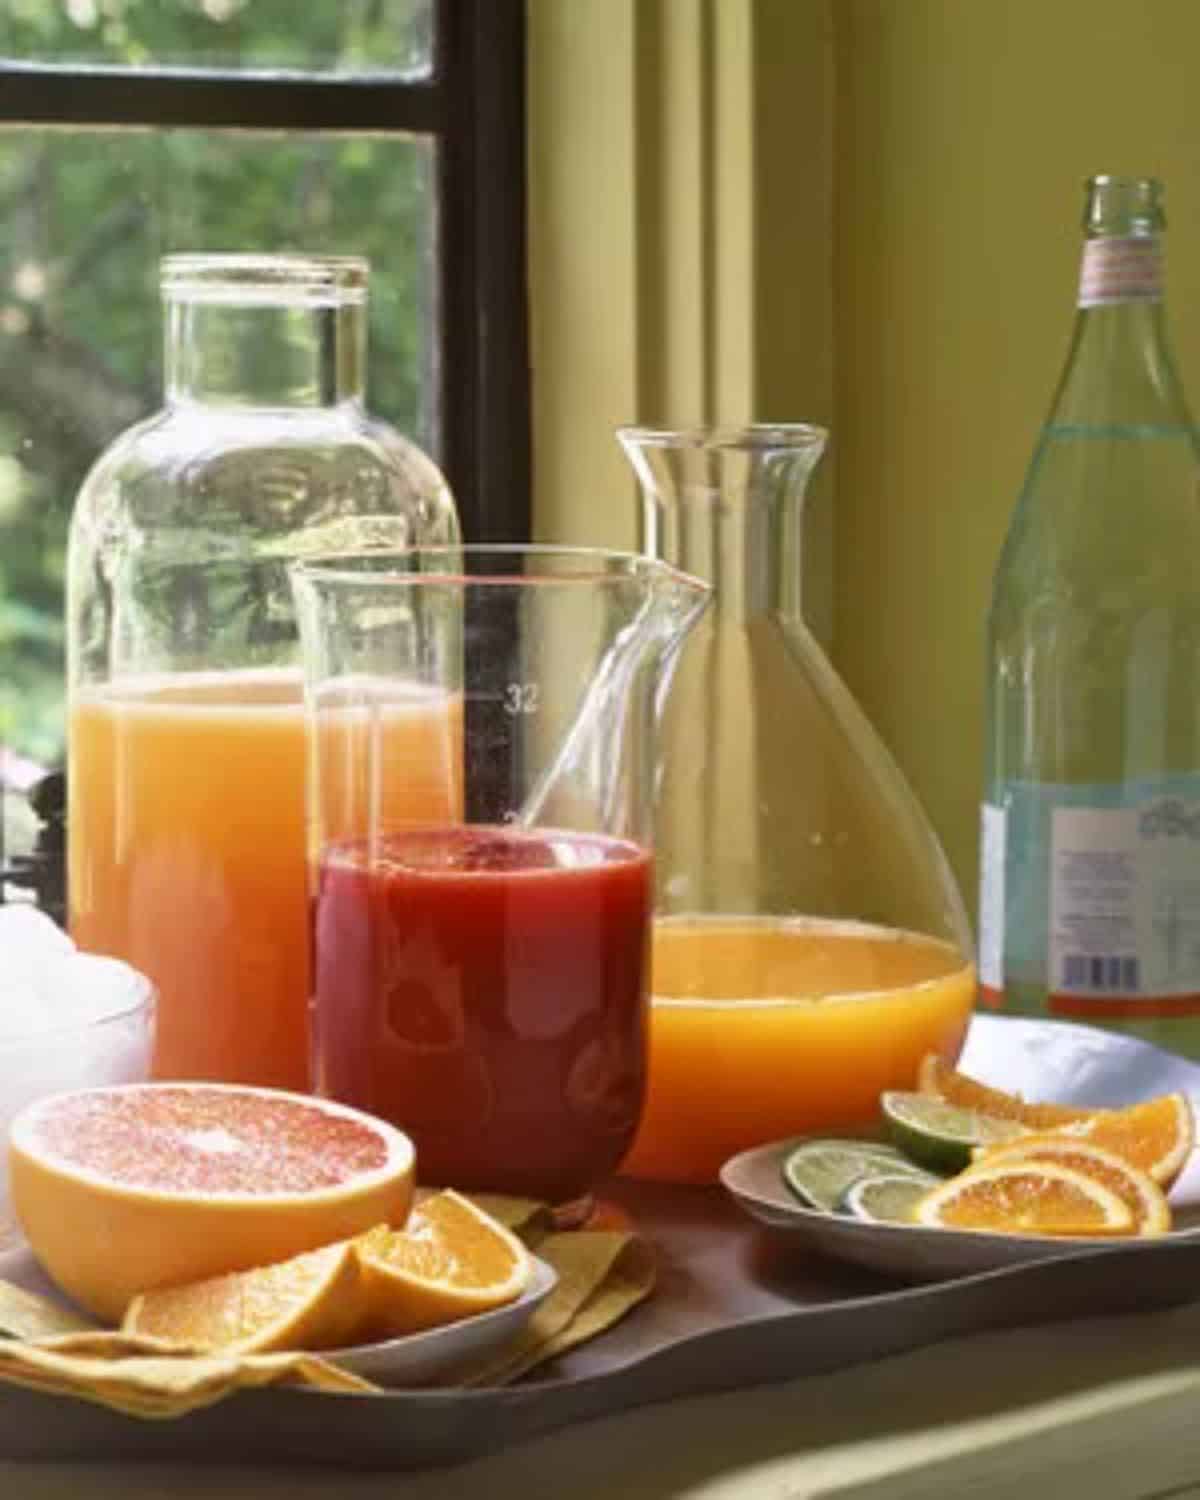 Different types of juices in glass containers.